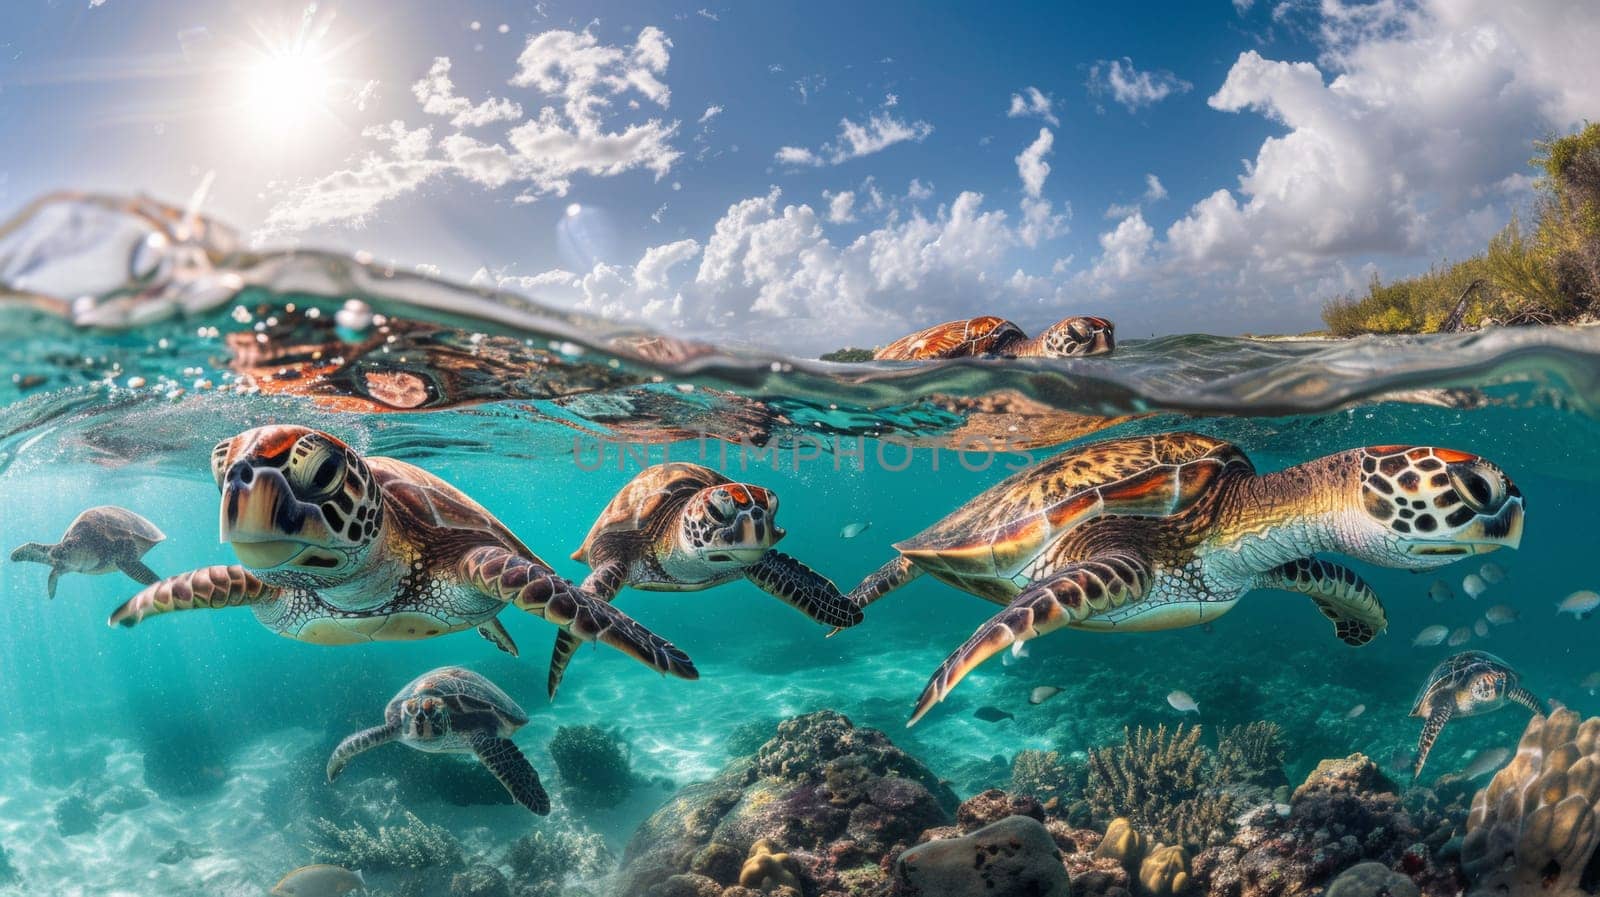 A group of turtles swimming in the ocean near coral reefs, AI by starush